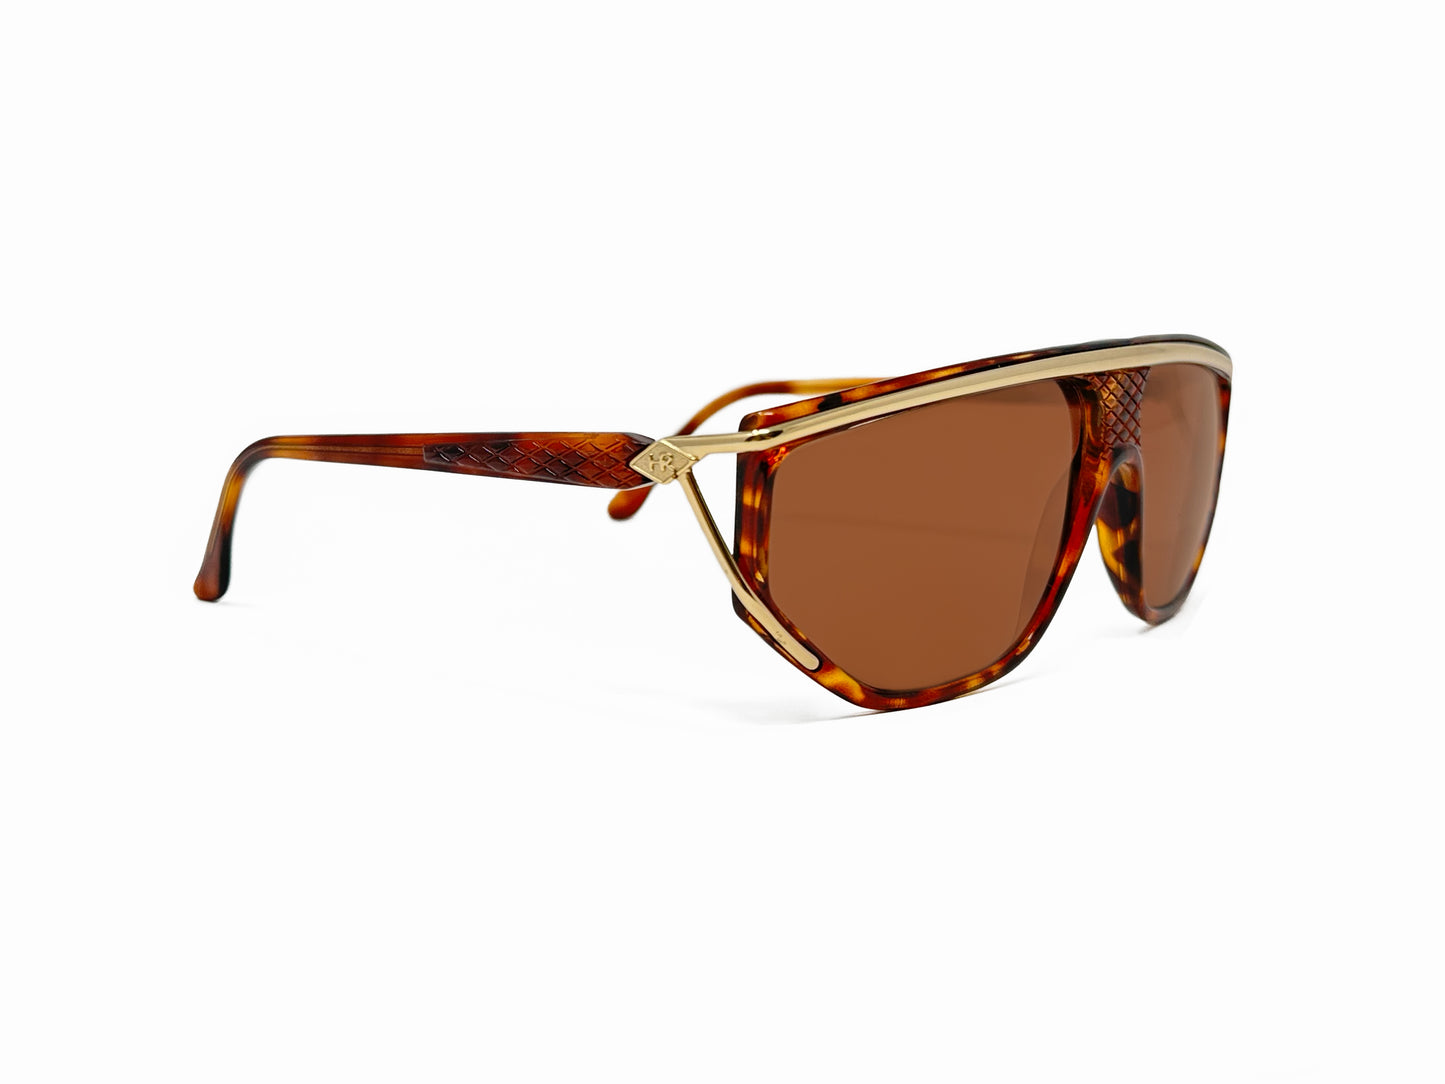 Helena Rubenstein rectangular, geometric, acetate sunglasses with a curved flattop. Model: HR201. Color: 4020 - Tortoise with gold metal accent across top of frame. Side view.